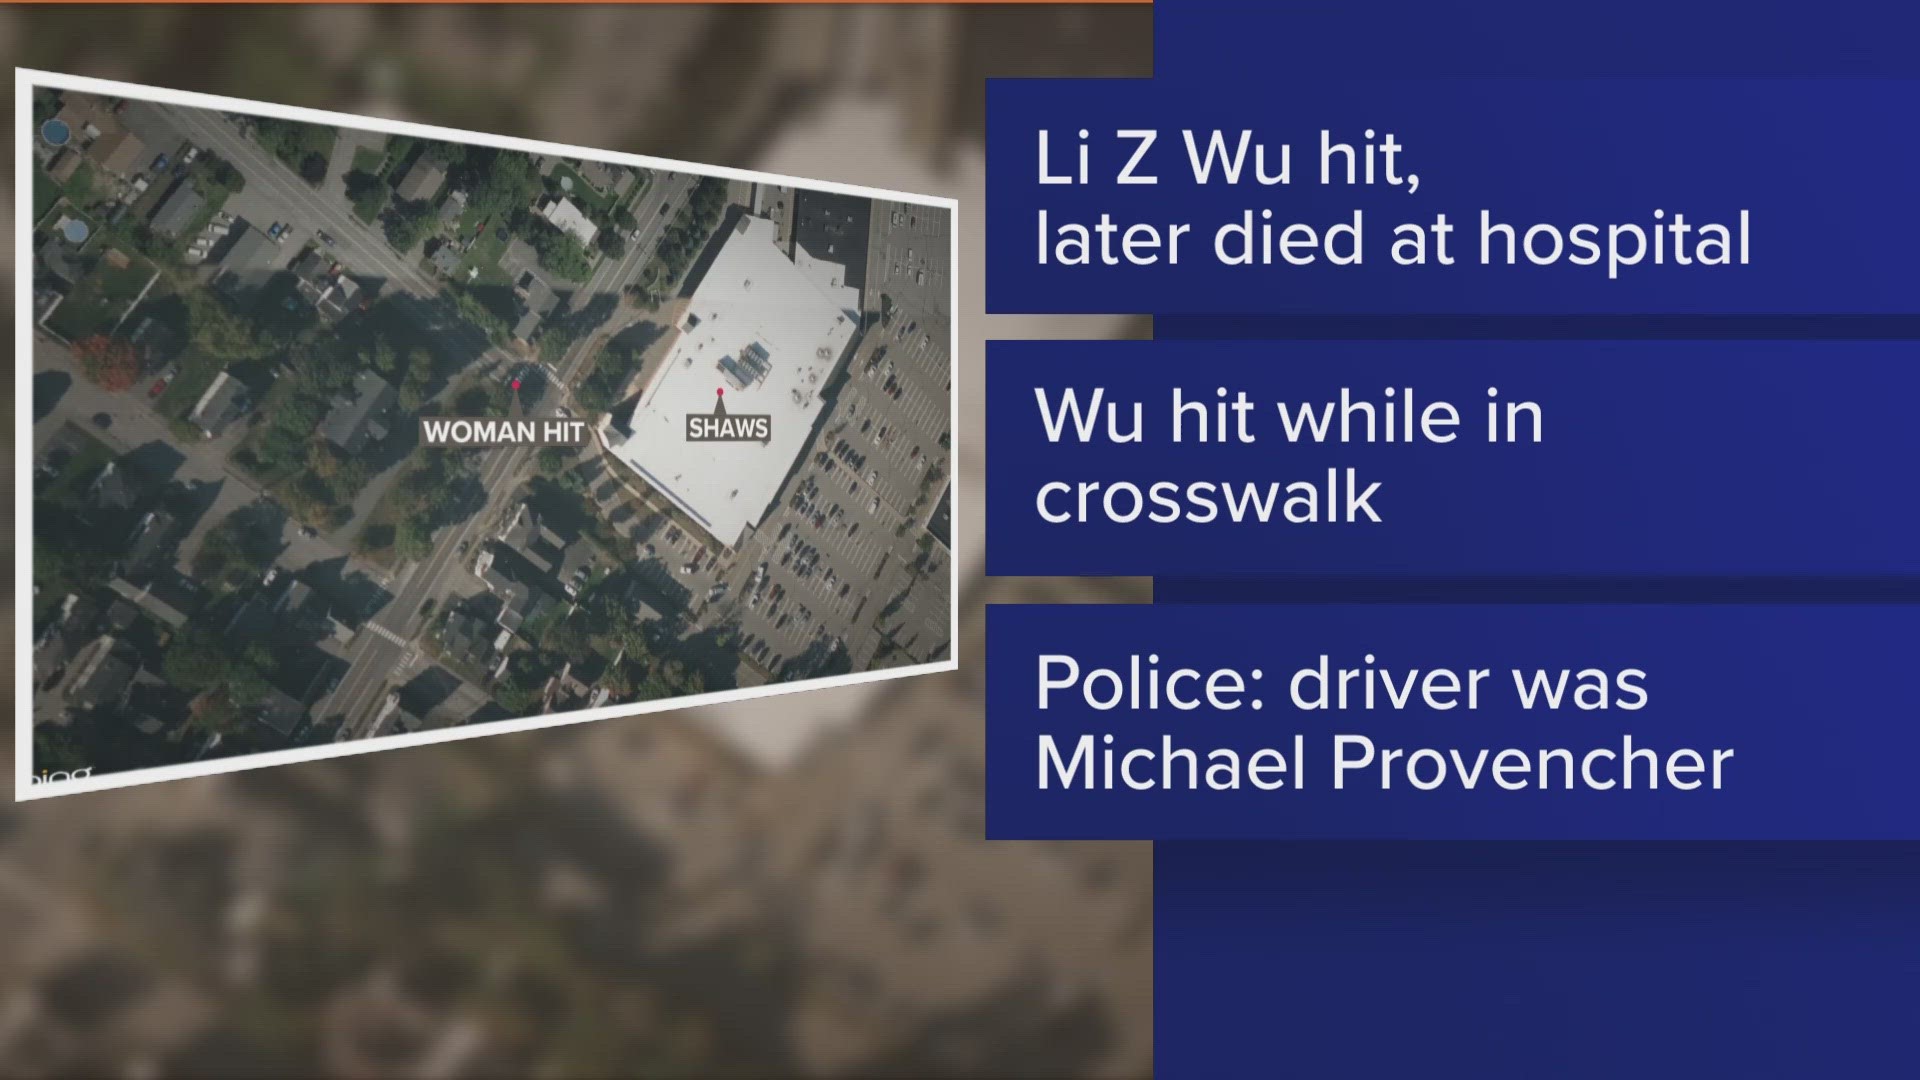 The woman was struck while she was reportedly crossing the road in a designated crosswalk.